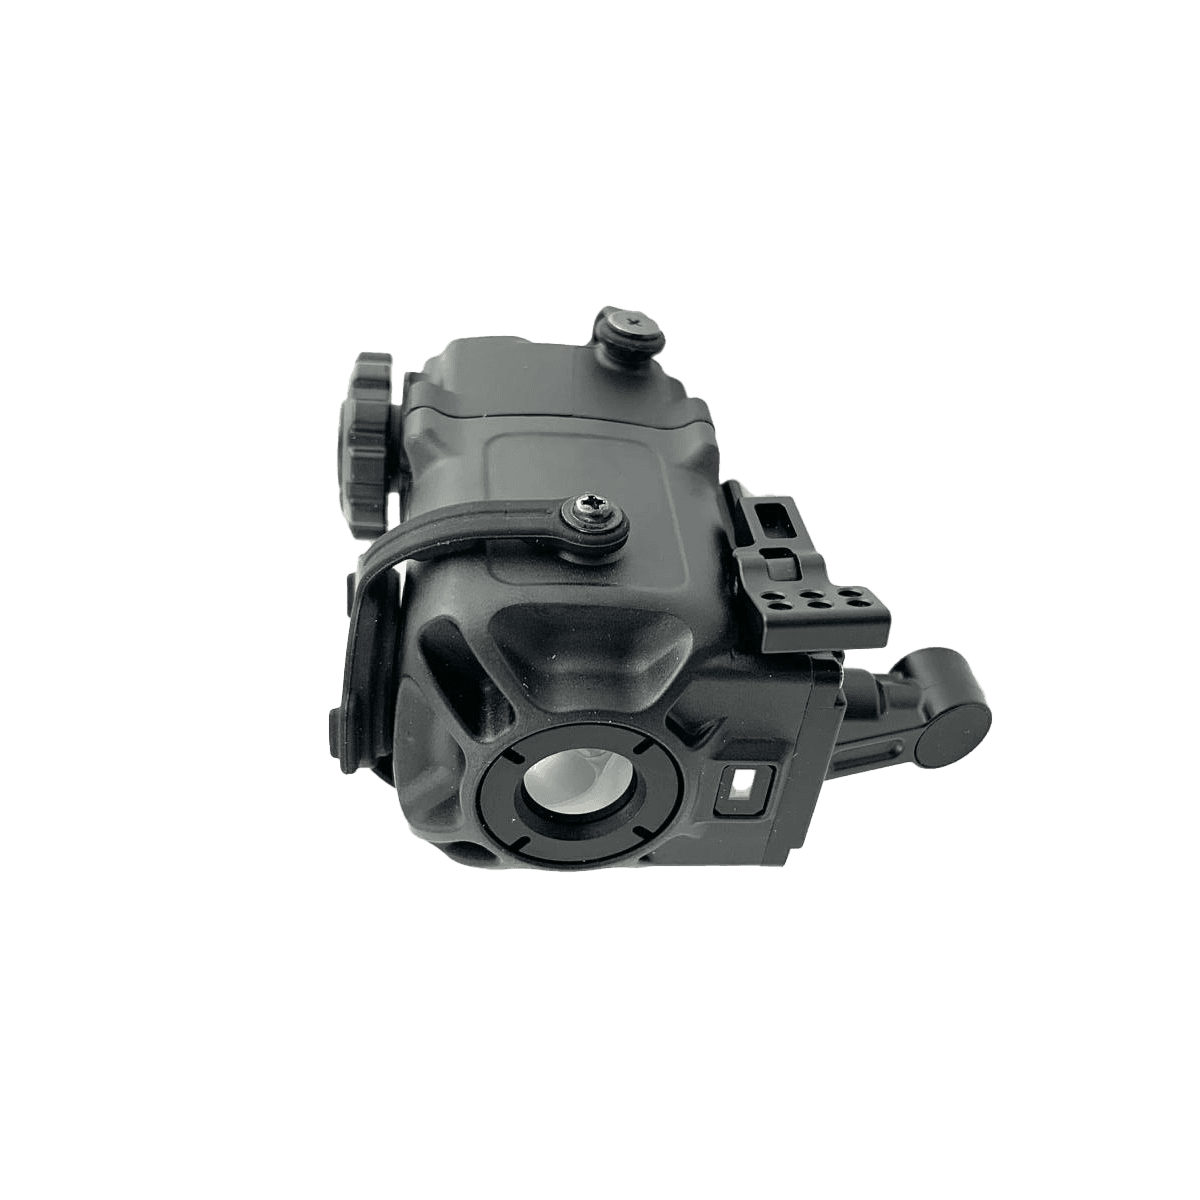 InfiRay Jerry CE5 Clip On IR Thermal Fusion